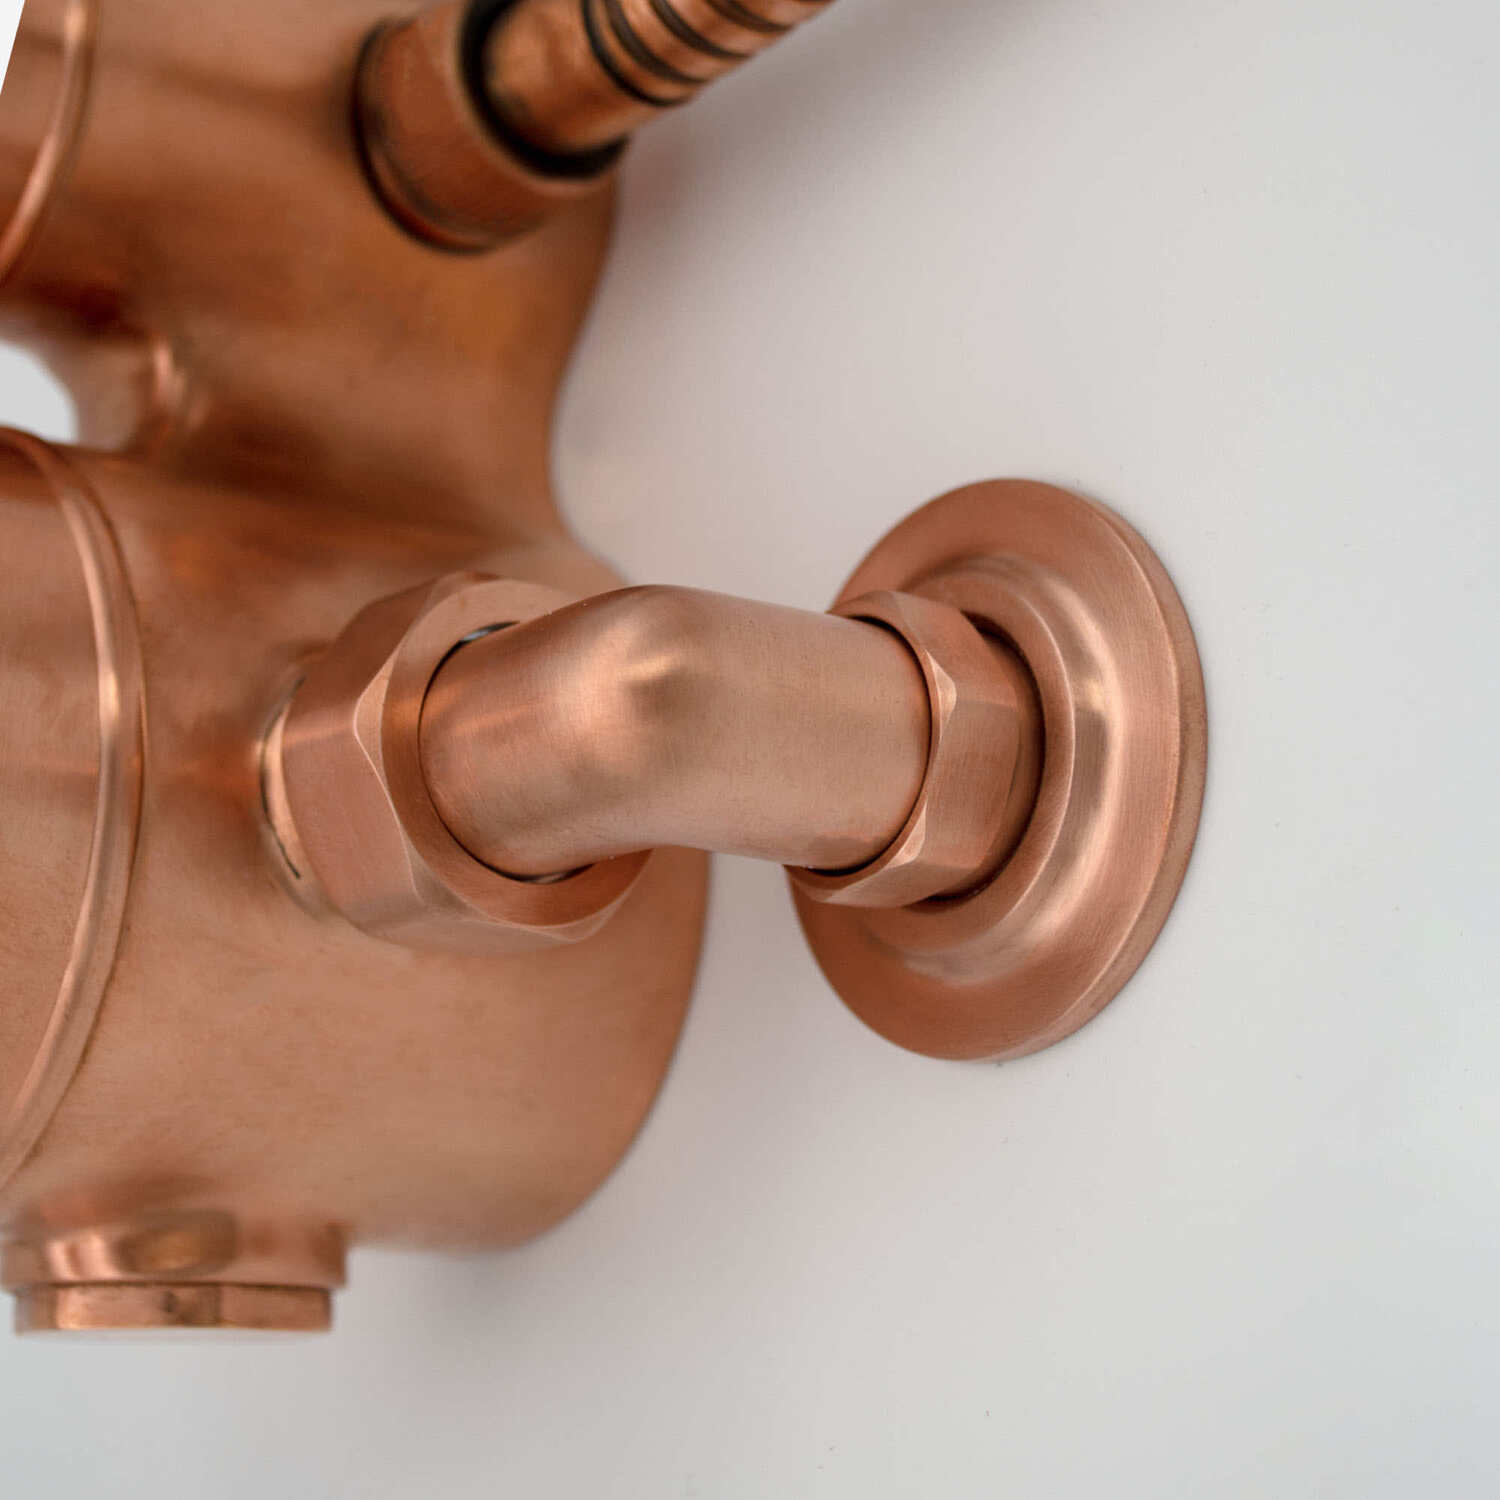 Natural antimicrobial properties of copper shower valve for hygienic showering - pipe inlet image